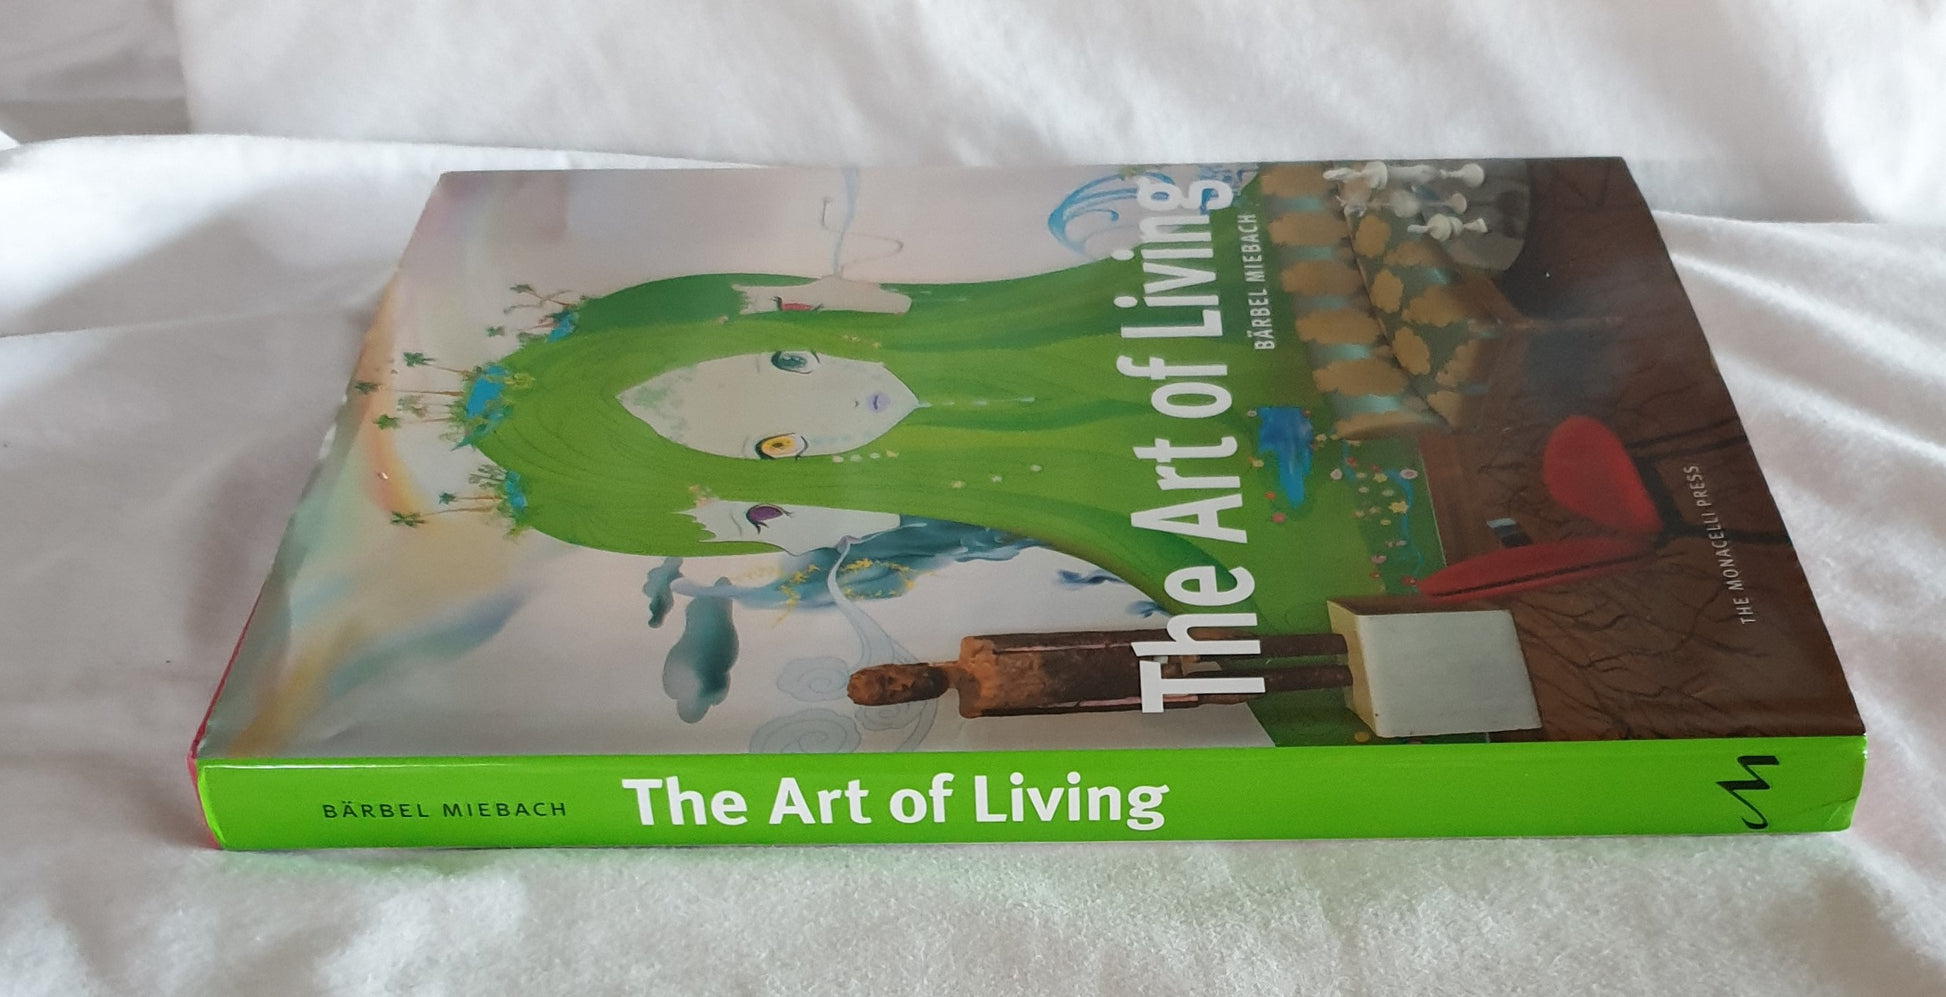 The Art of Living by Barbel Miebach